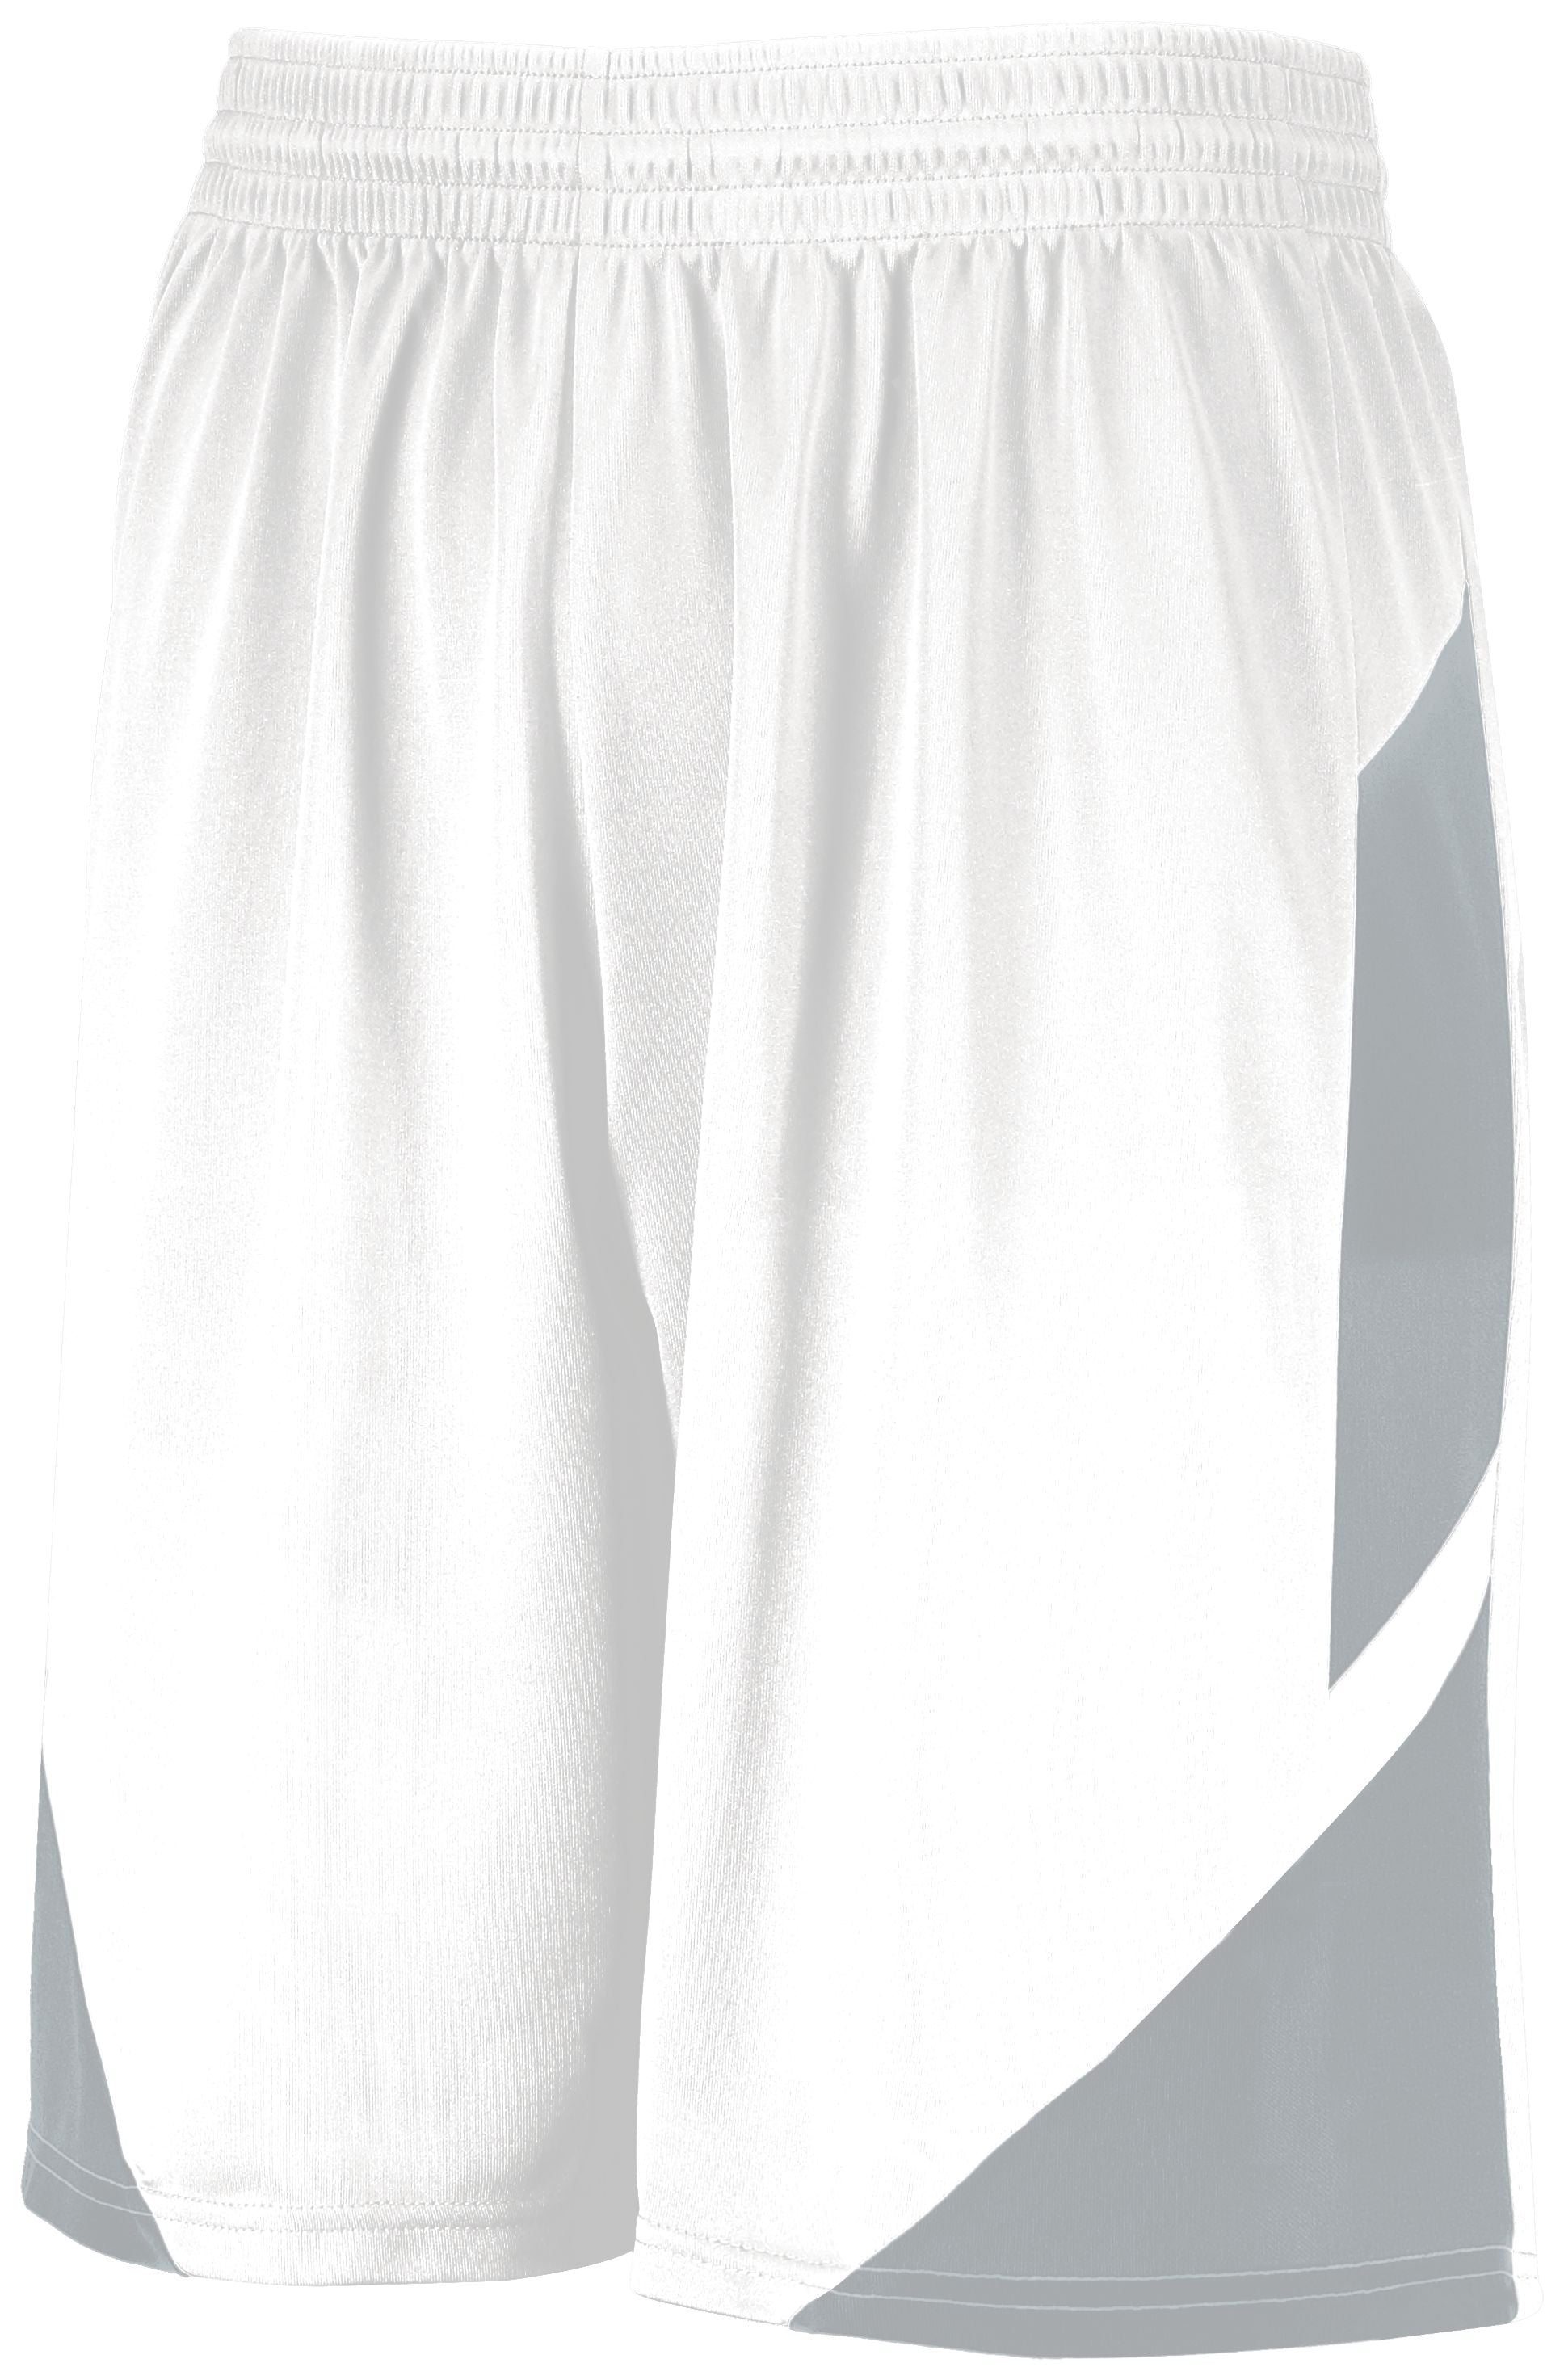 Augusta Sportswear Step-Back Basketball Shorts in White/Silver  -Part of the Adult, Adult-Shorts, Augusta-Products, Basketball, All-Sports, All-Sports-1 product lines at KanaleyCreations.com